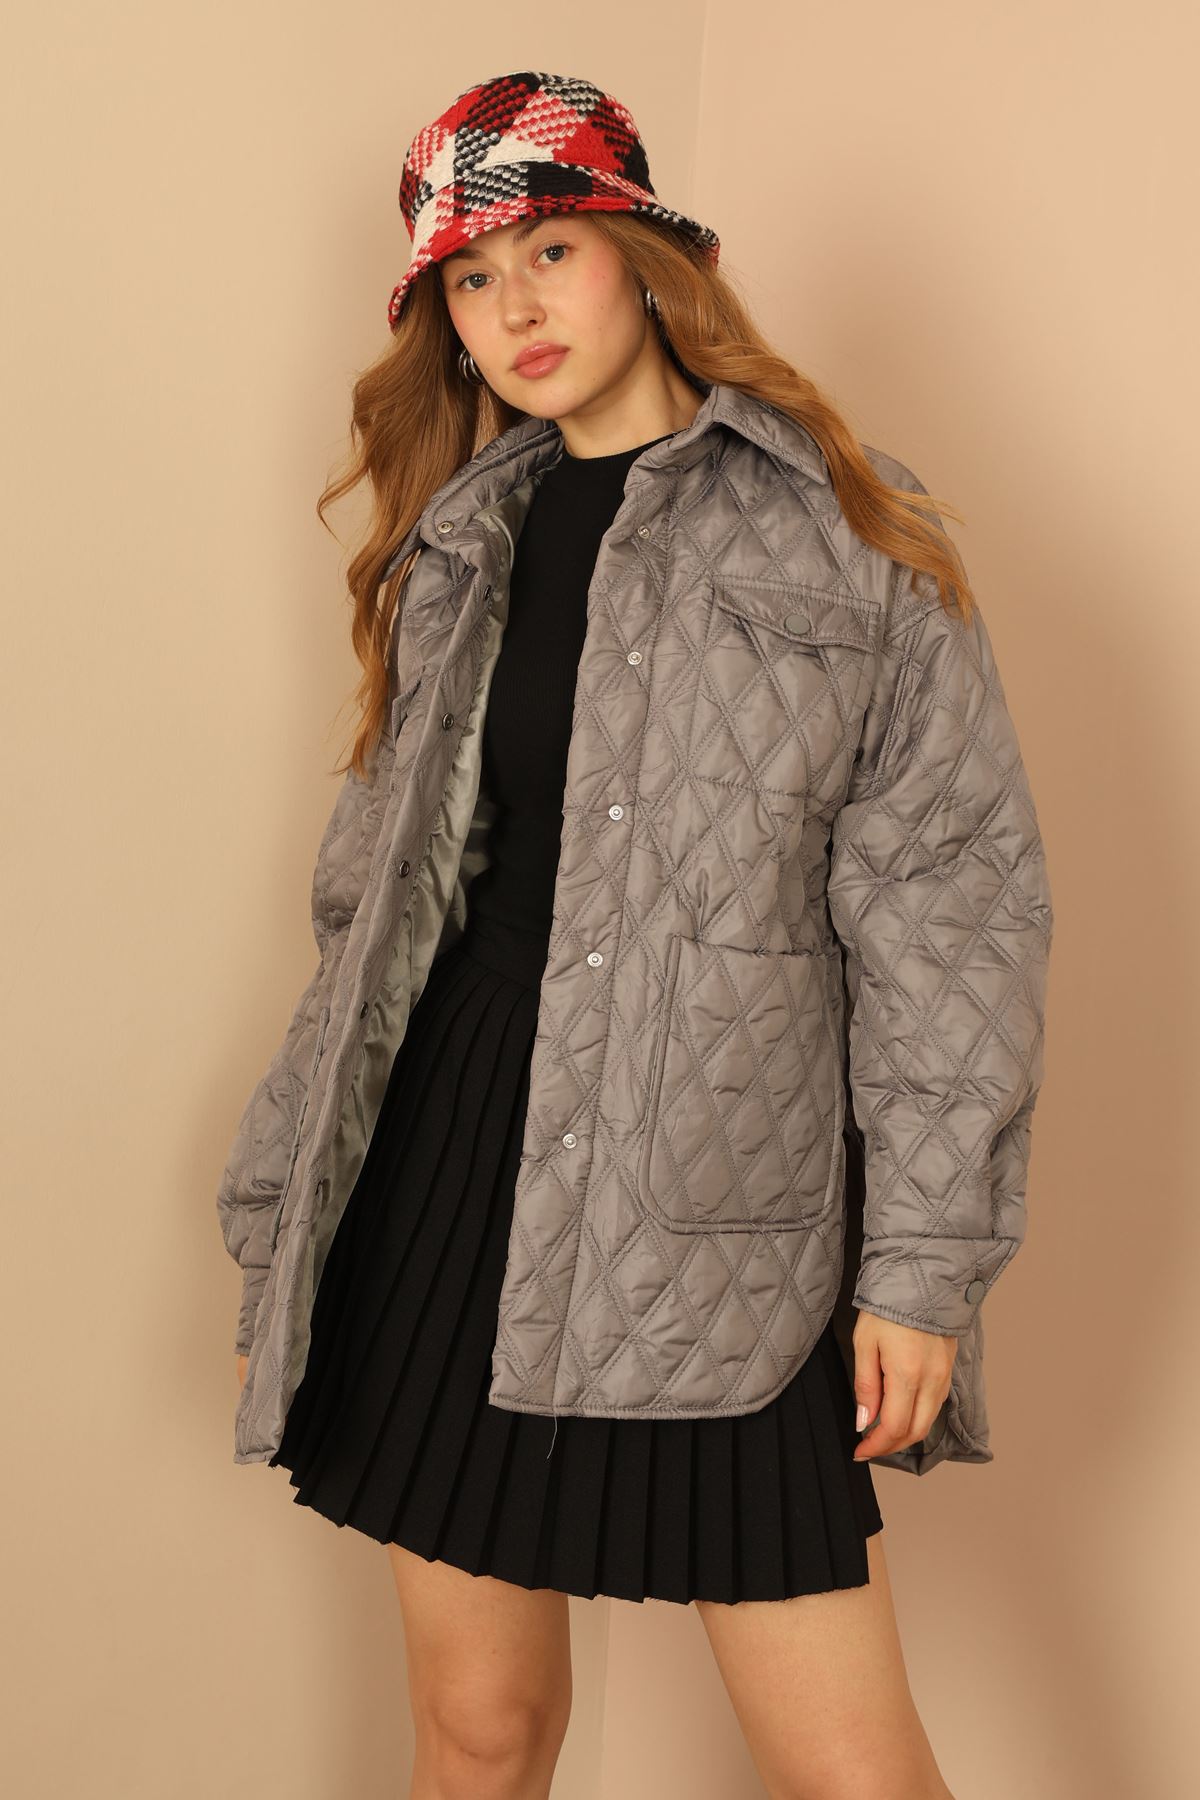 Quilted Fabric Double Stitch Pattern Women Coats-Grey